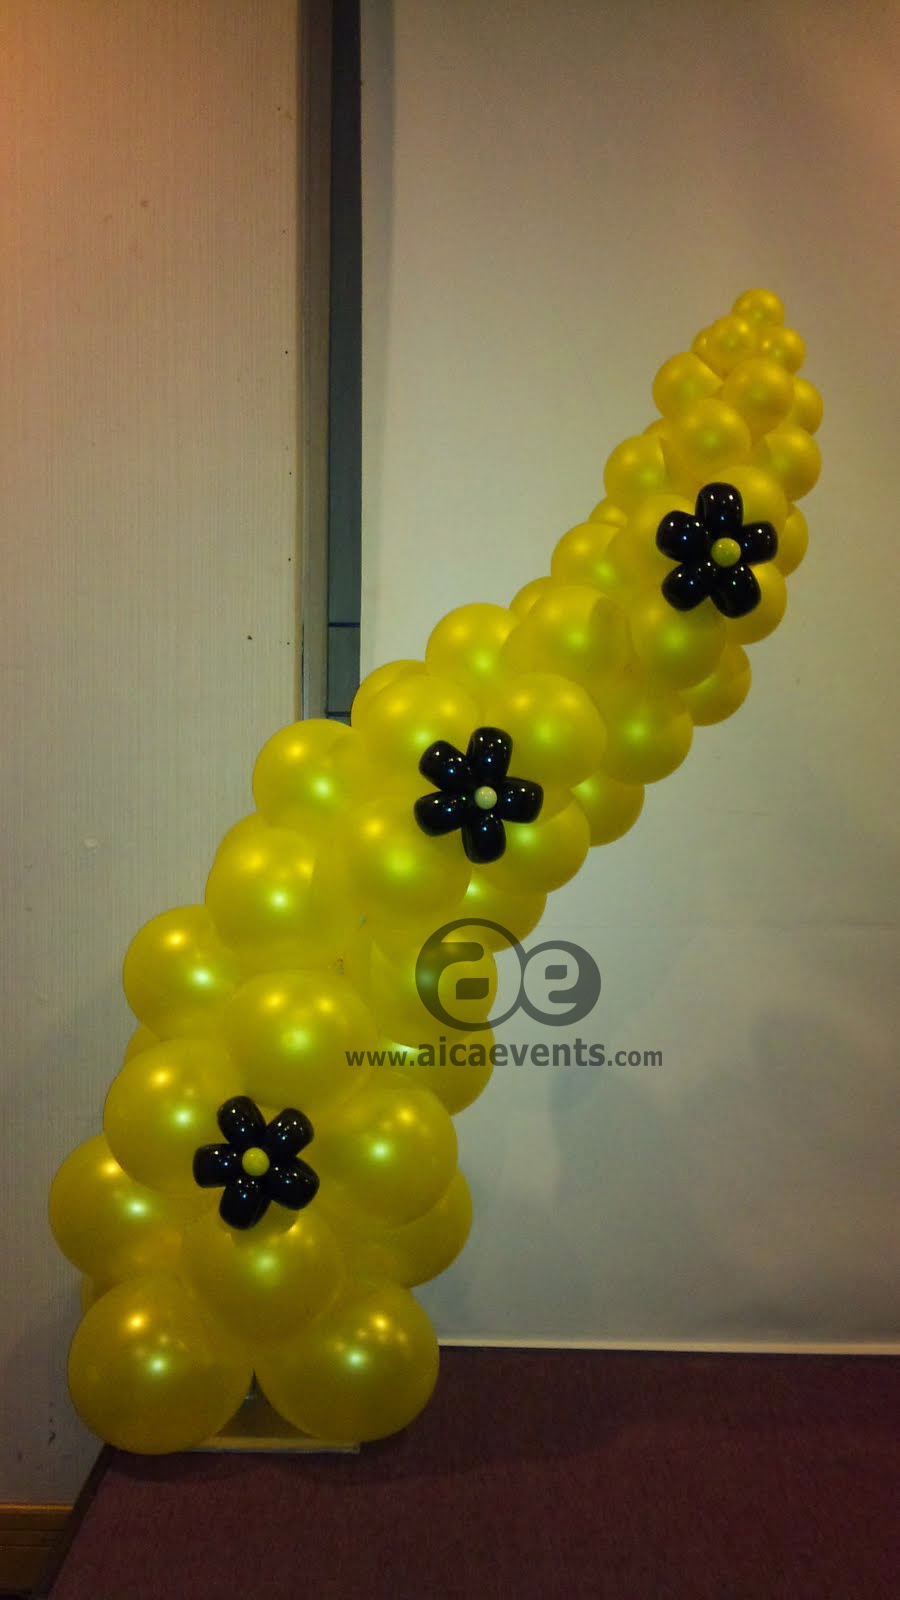 Aicaevents India Balloon Decorations  for parties